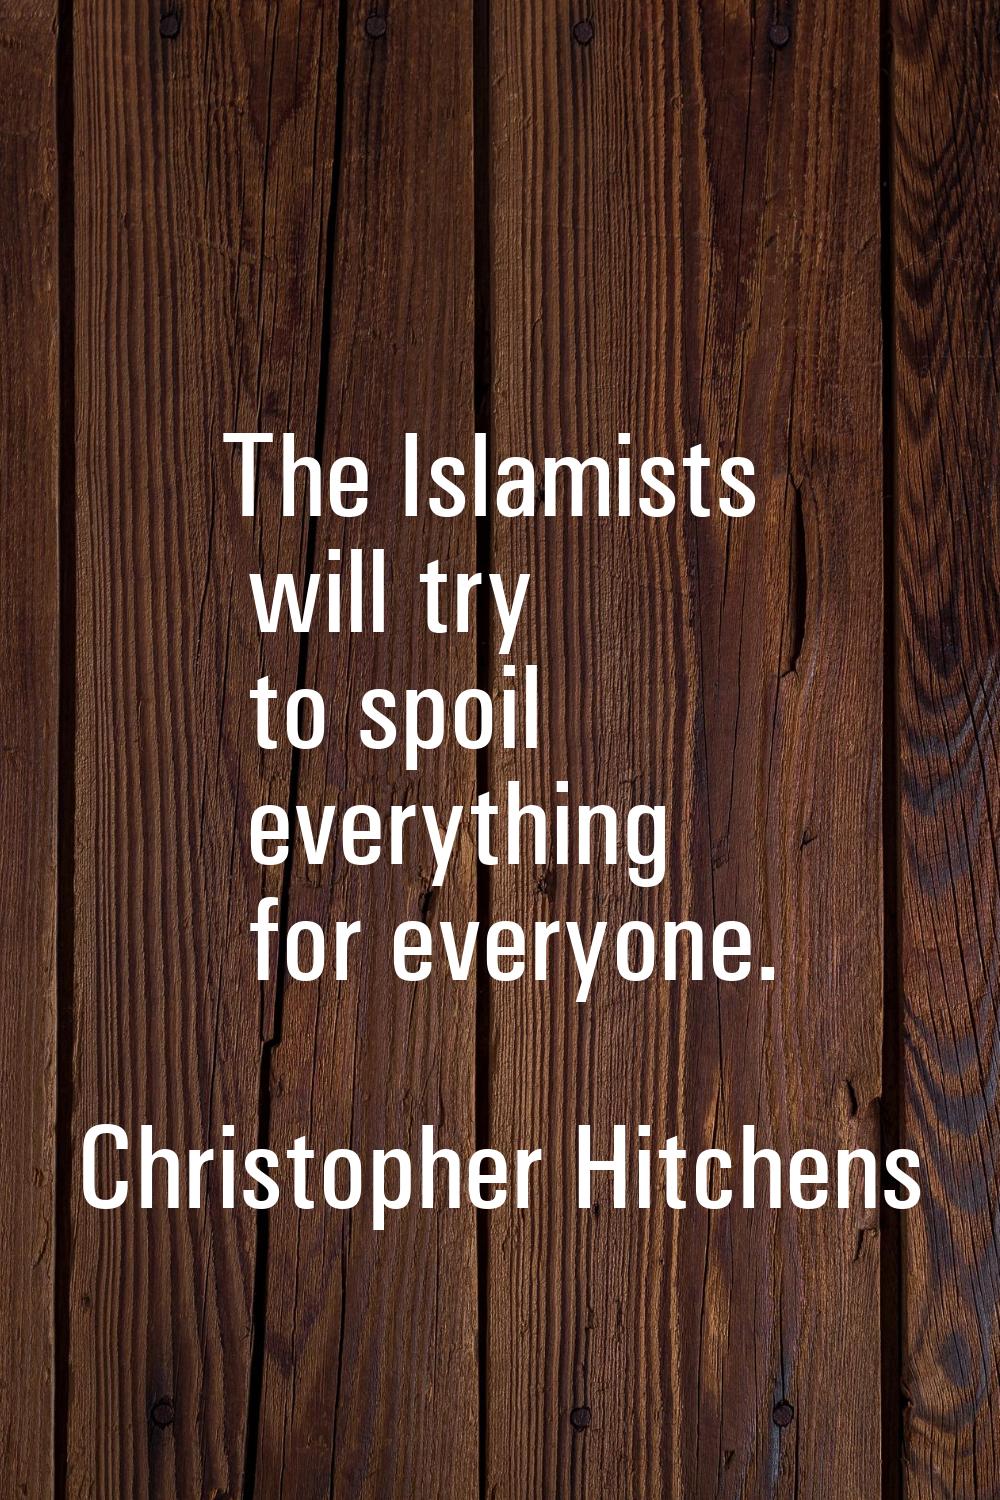 The Islamists will try to spoil everything for everyone.